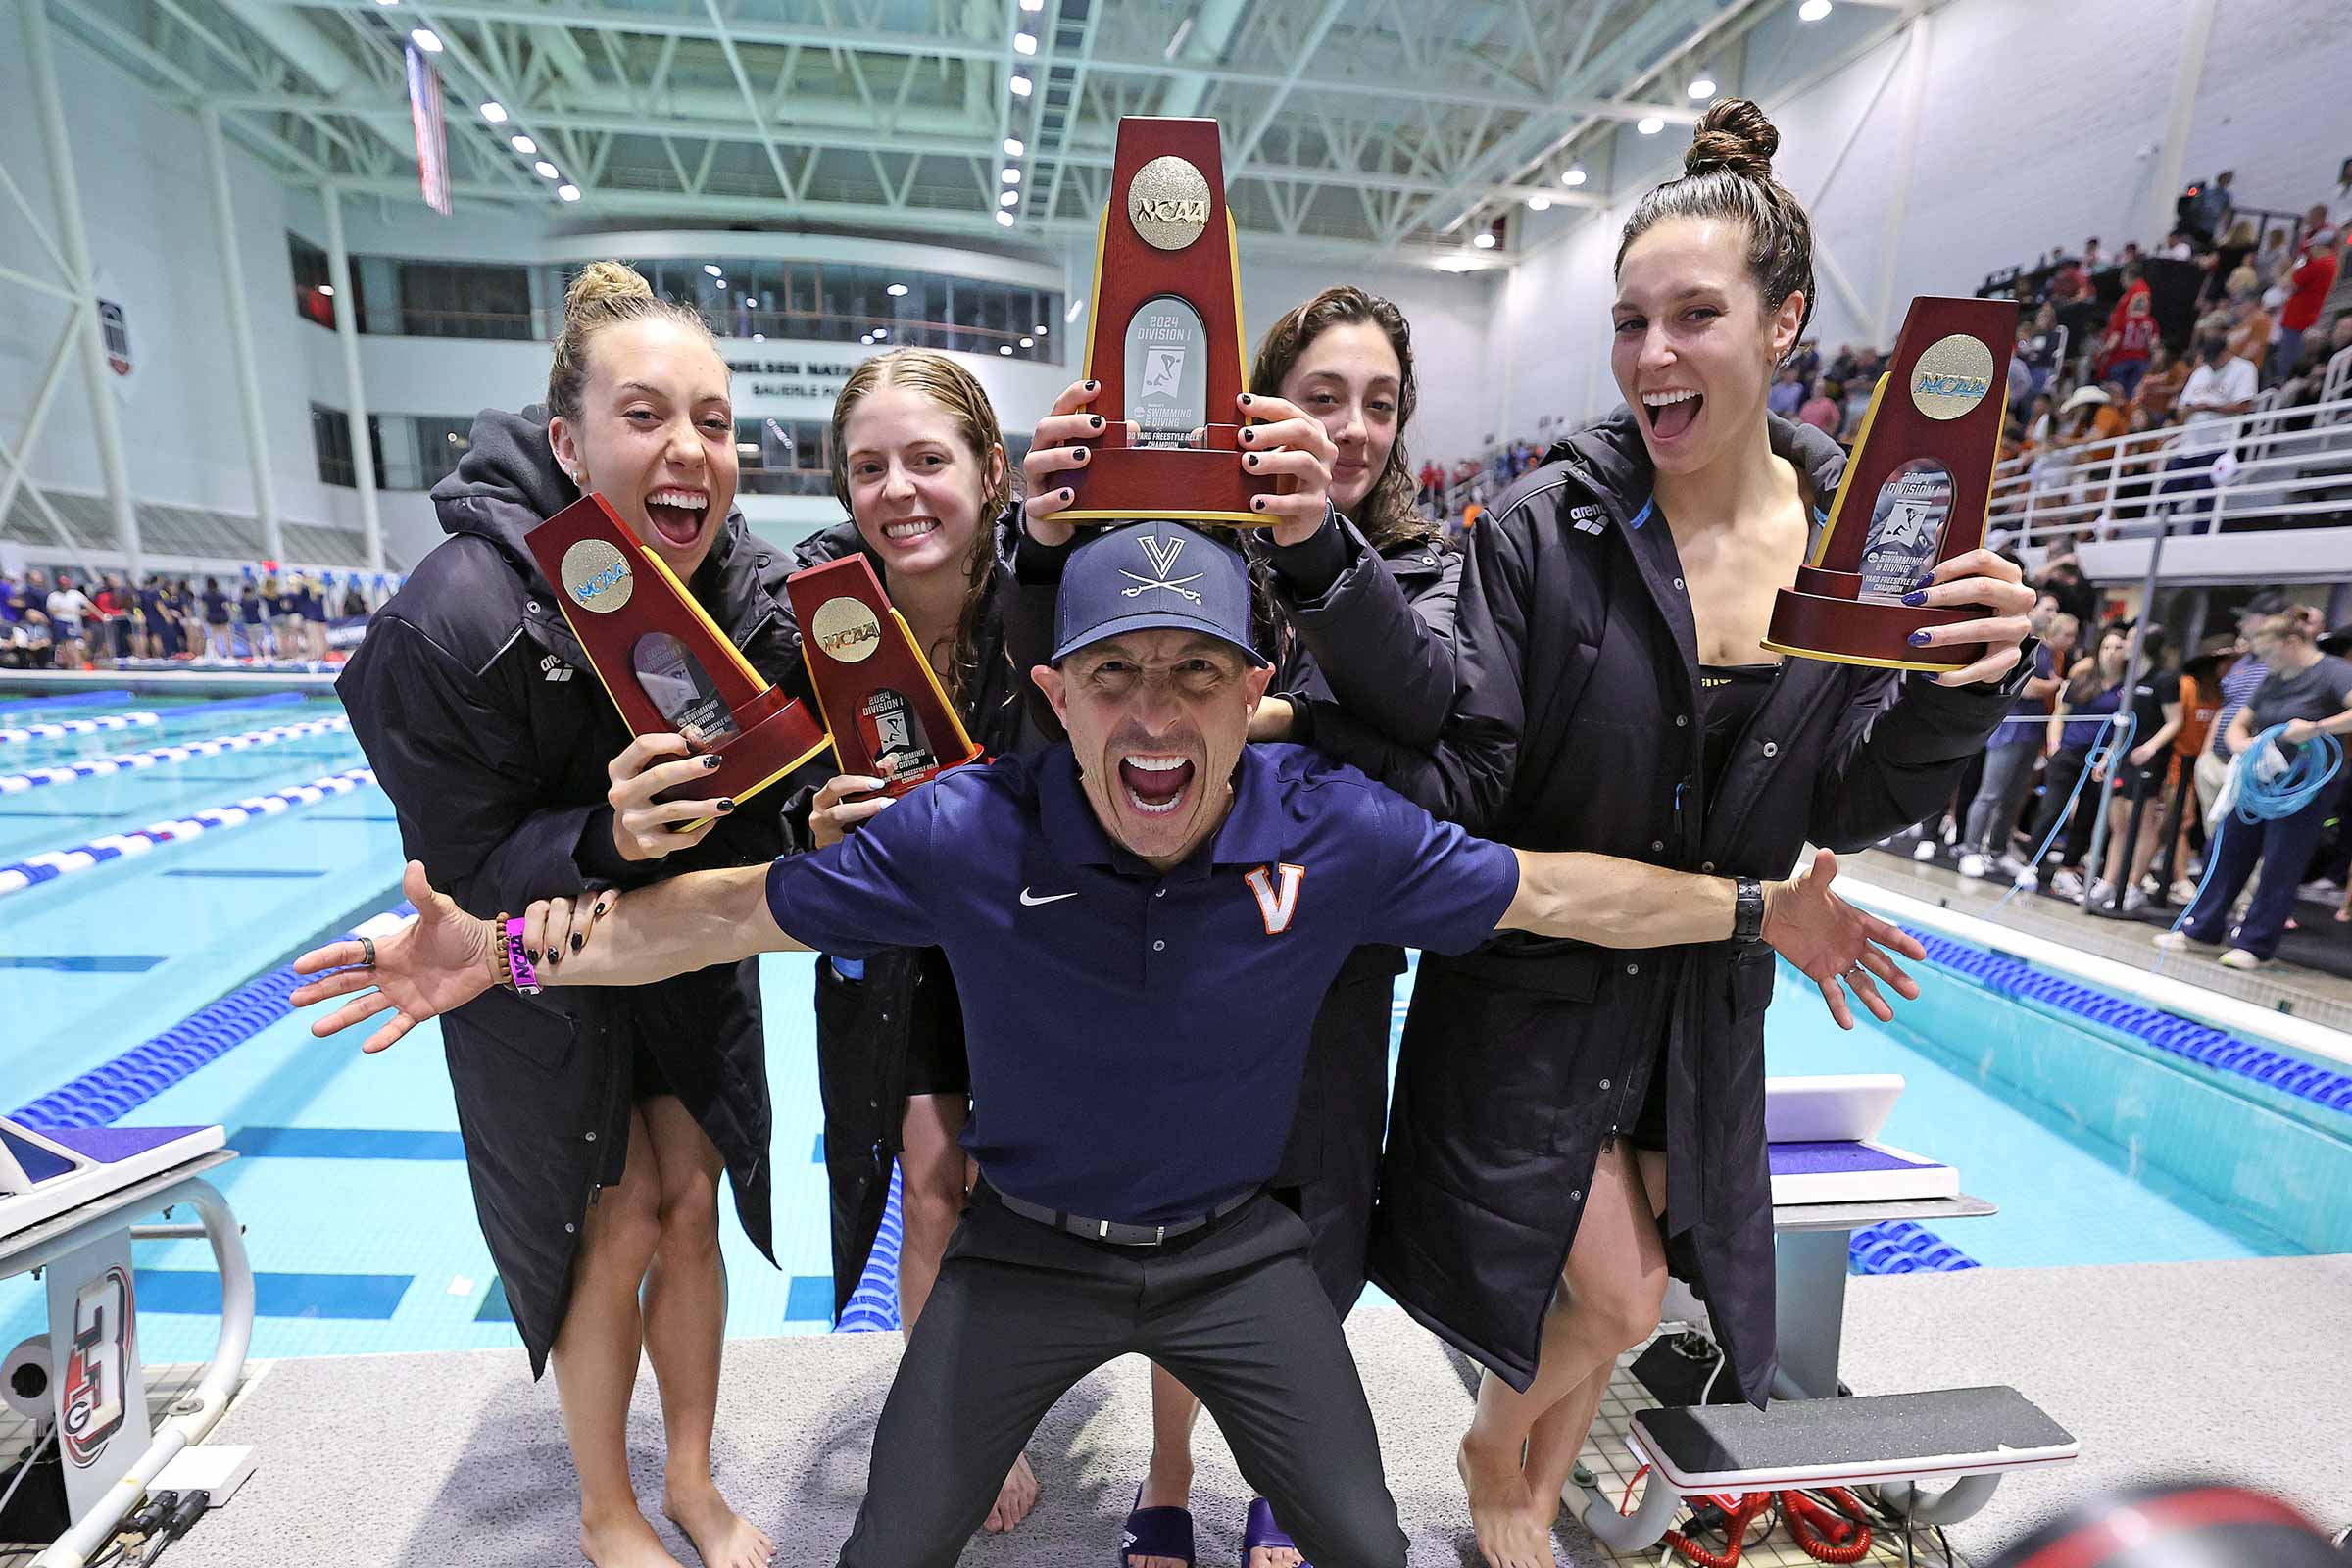 Coach poses in front of swimmers holding trophies